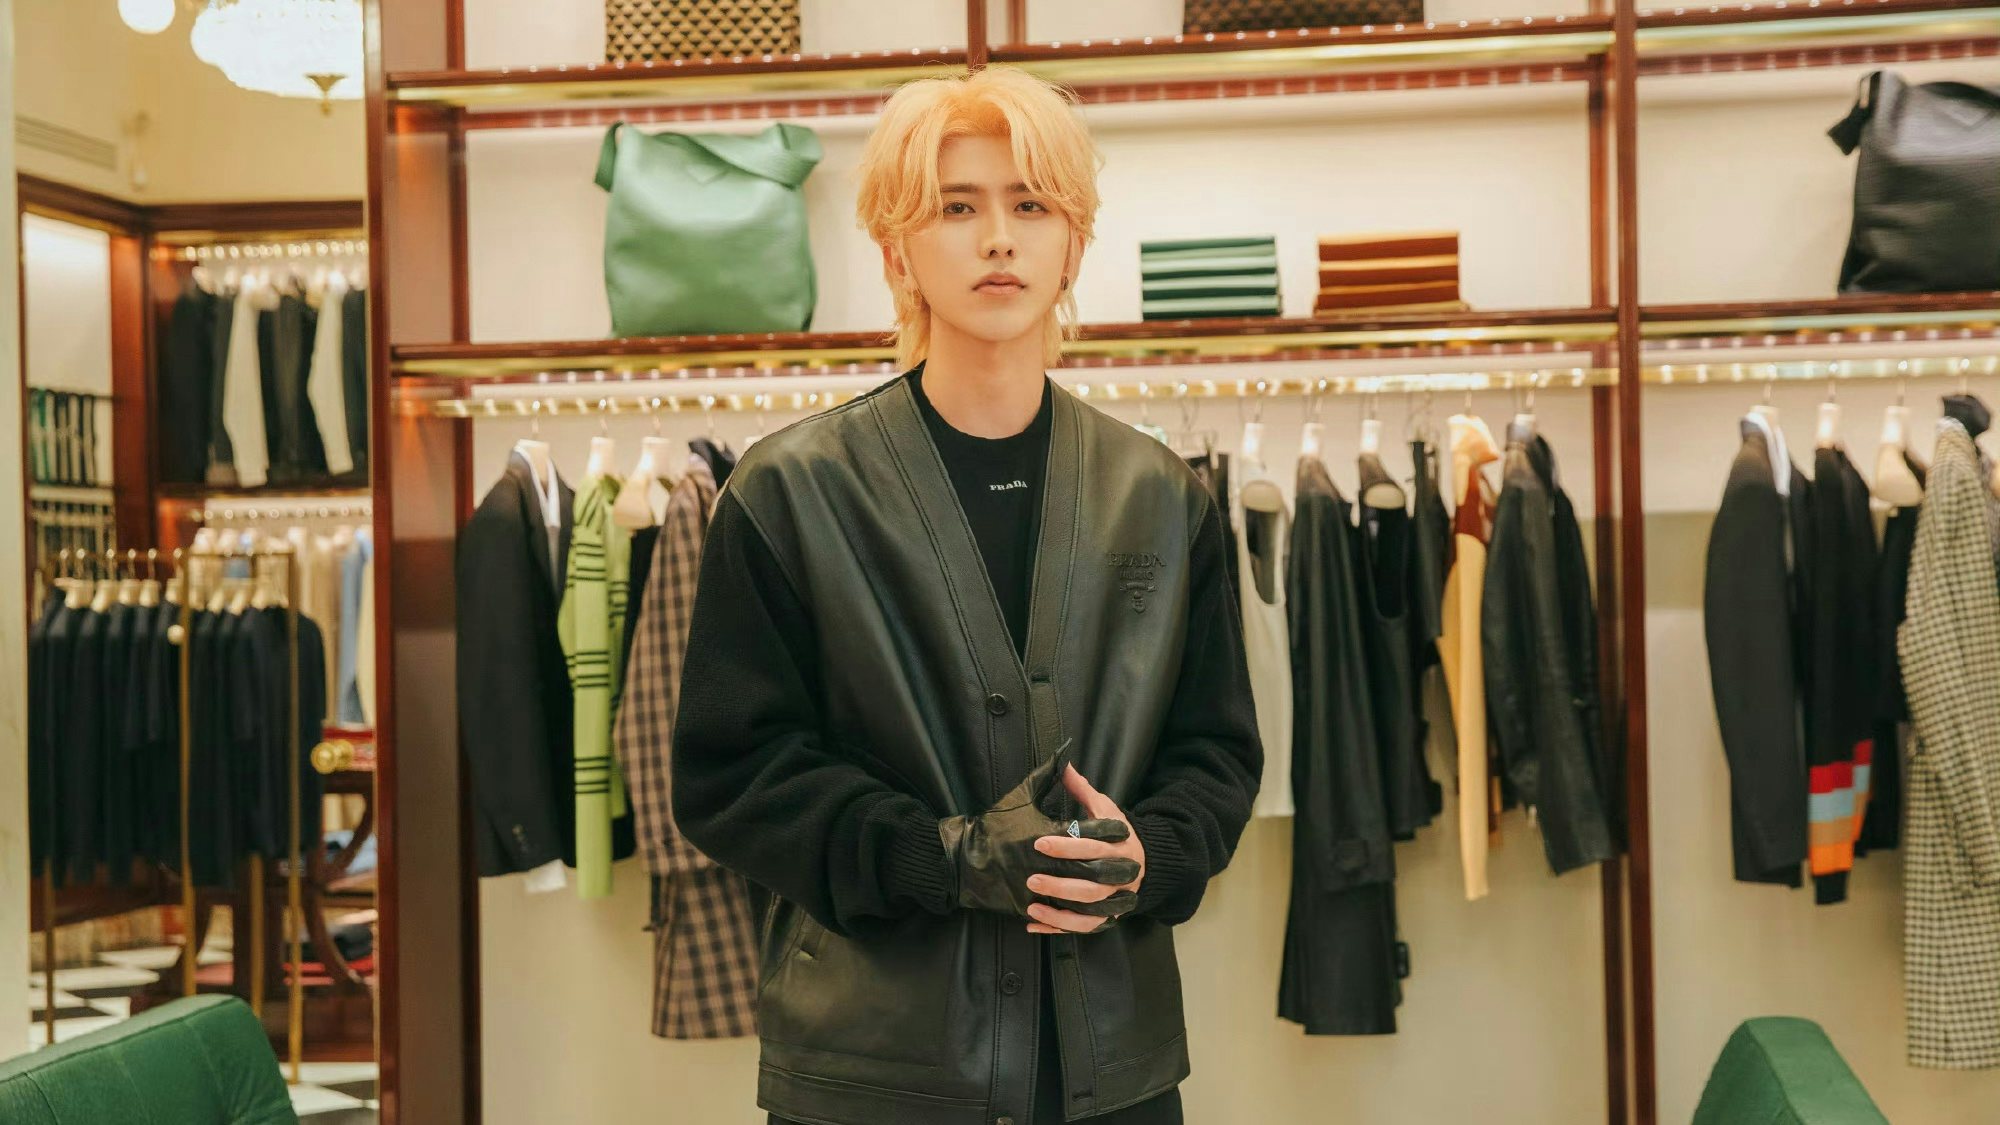 Rumors are swirling that Prada ambassador Cai Xukun is embroiled in a sex scandal. Watching how netizens and brands react will provide insight into China’s complex arena of celebrity culture.      Photo: Prada